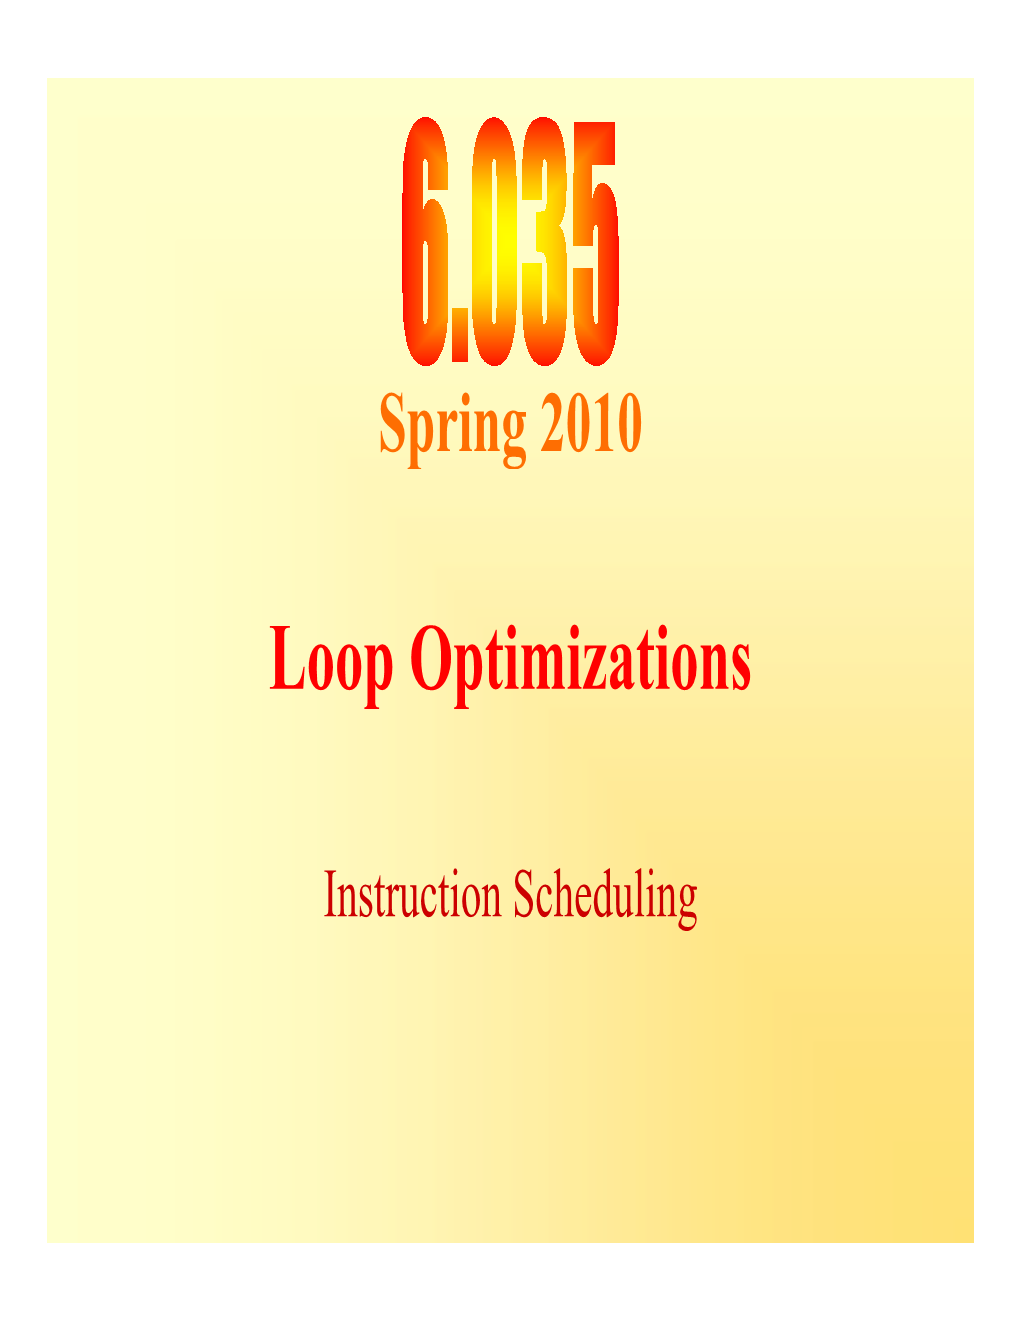 6.035 Lecture 14, Loop Optimizations: Instruction Scheduling